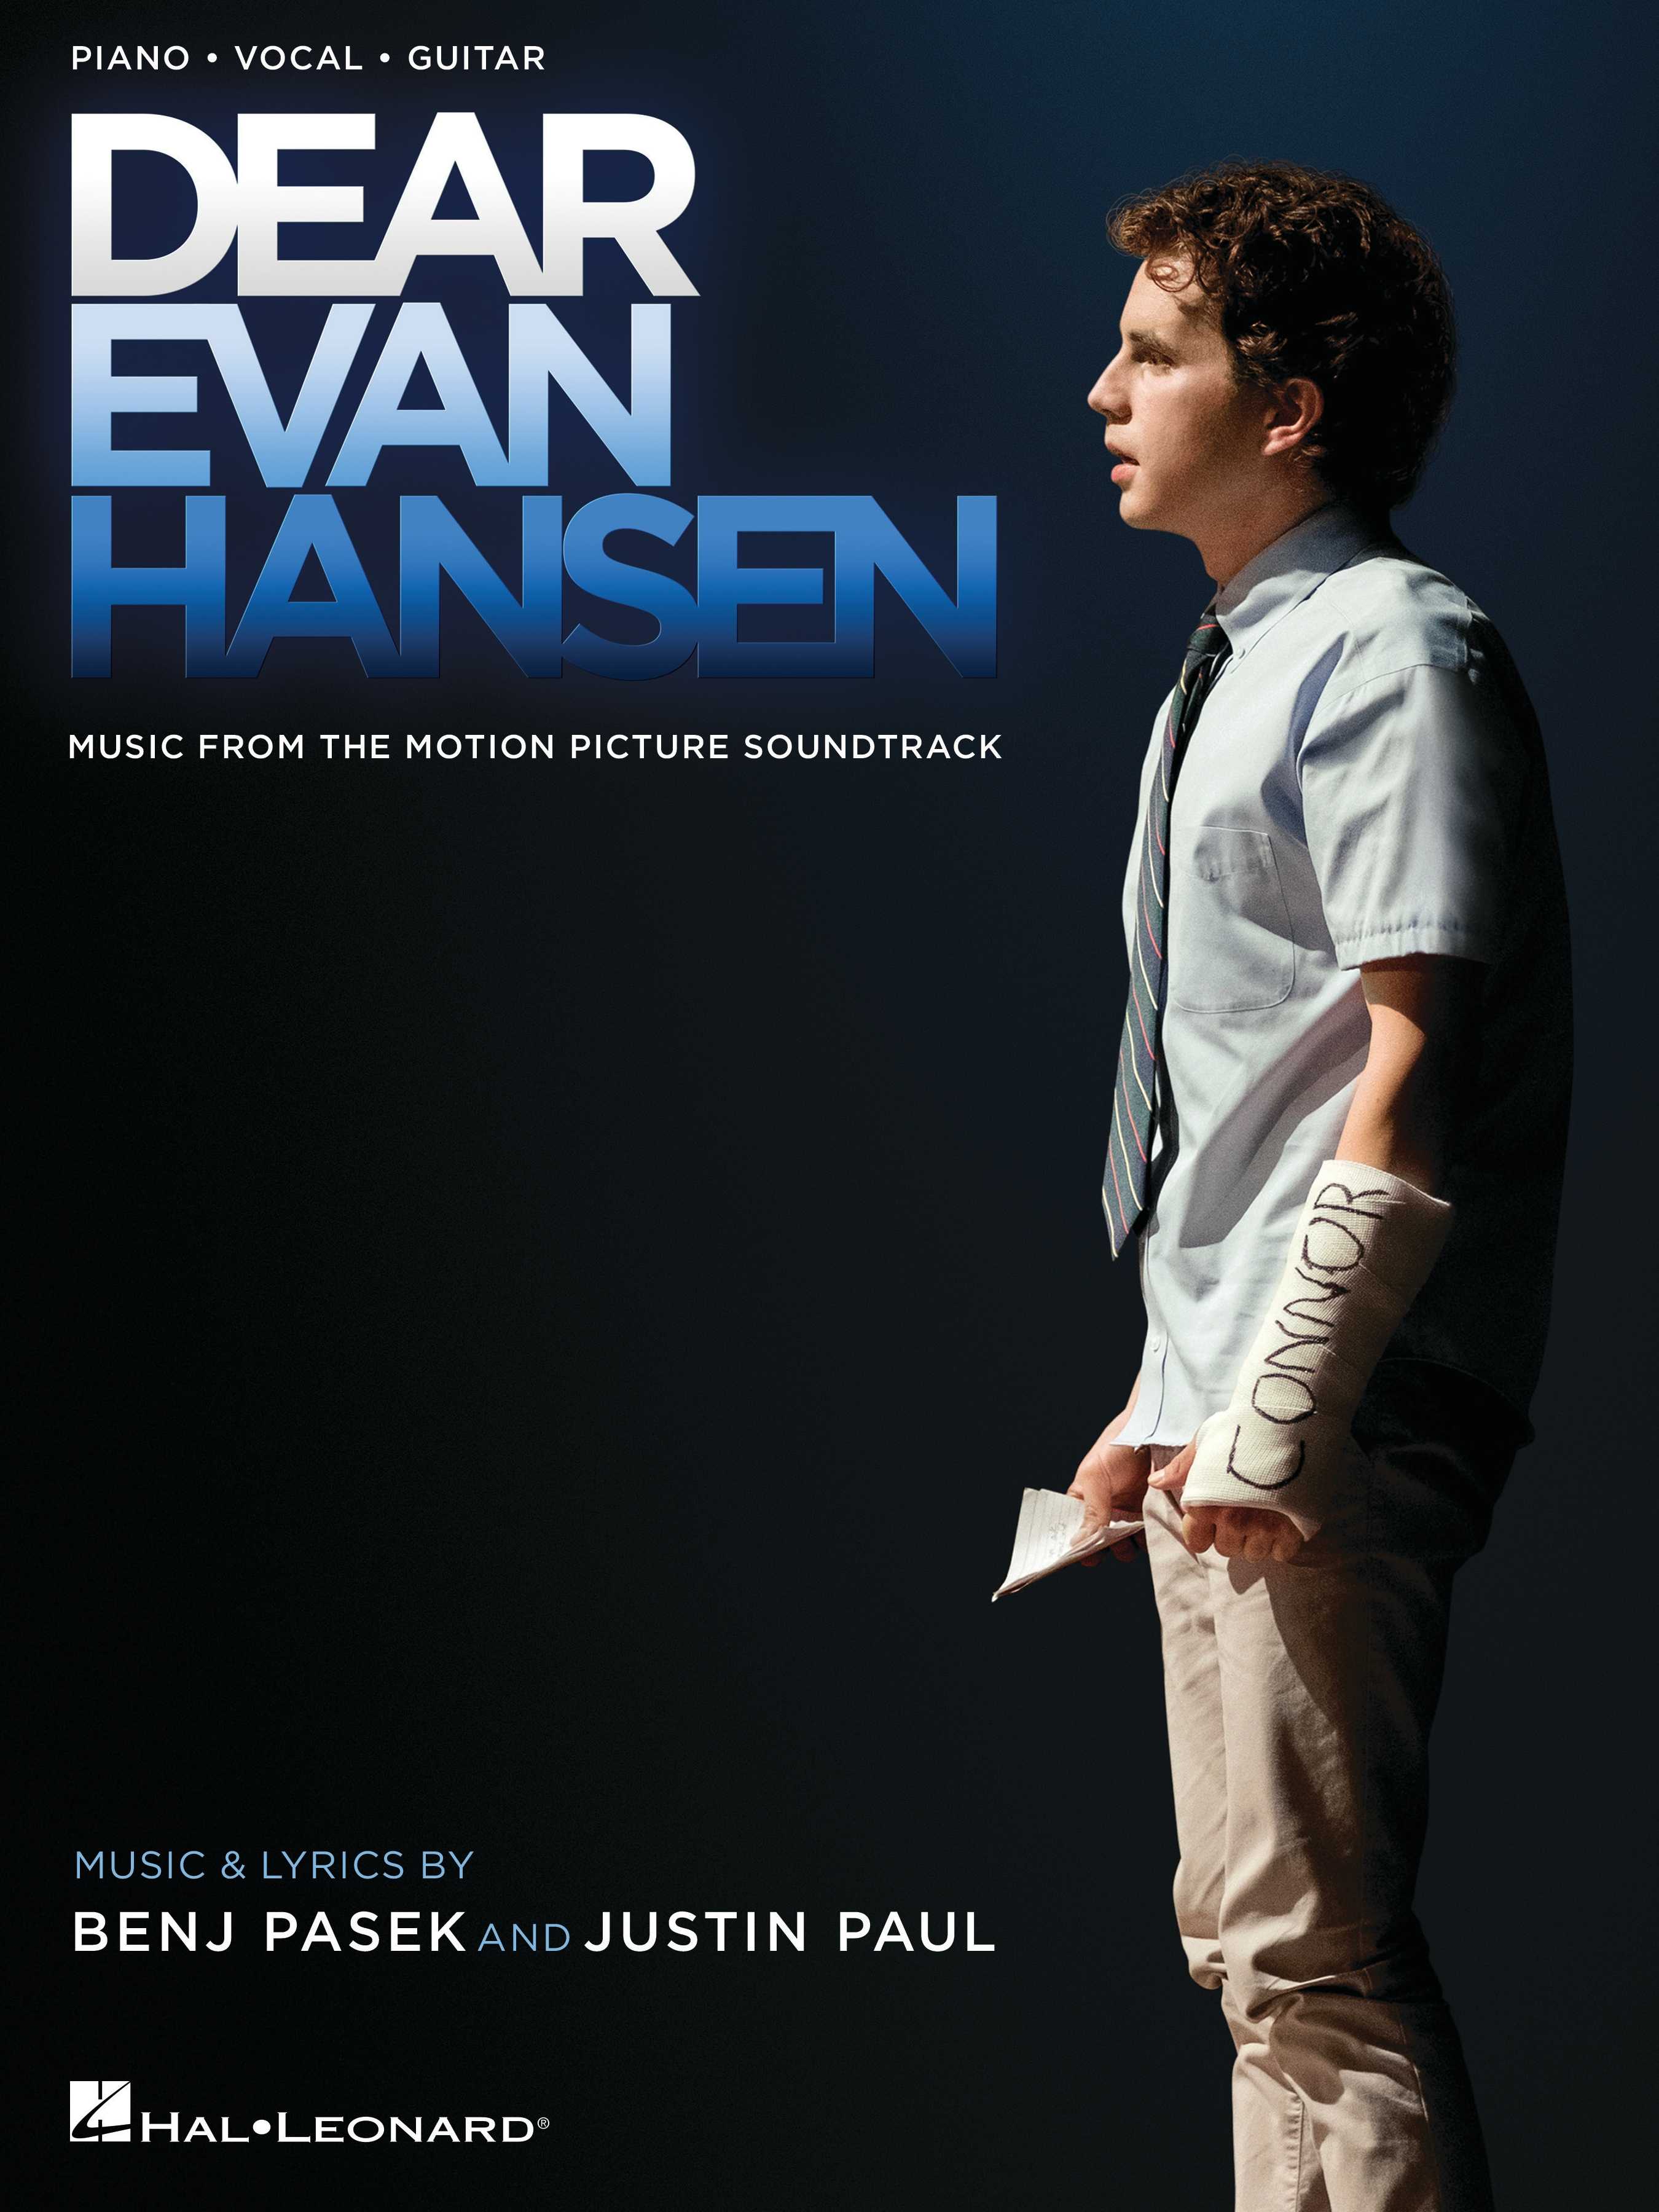 Dear Evan Hansen Music from the Motion Picture Soundtrack